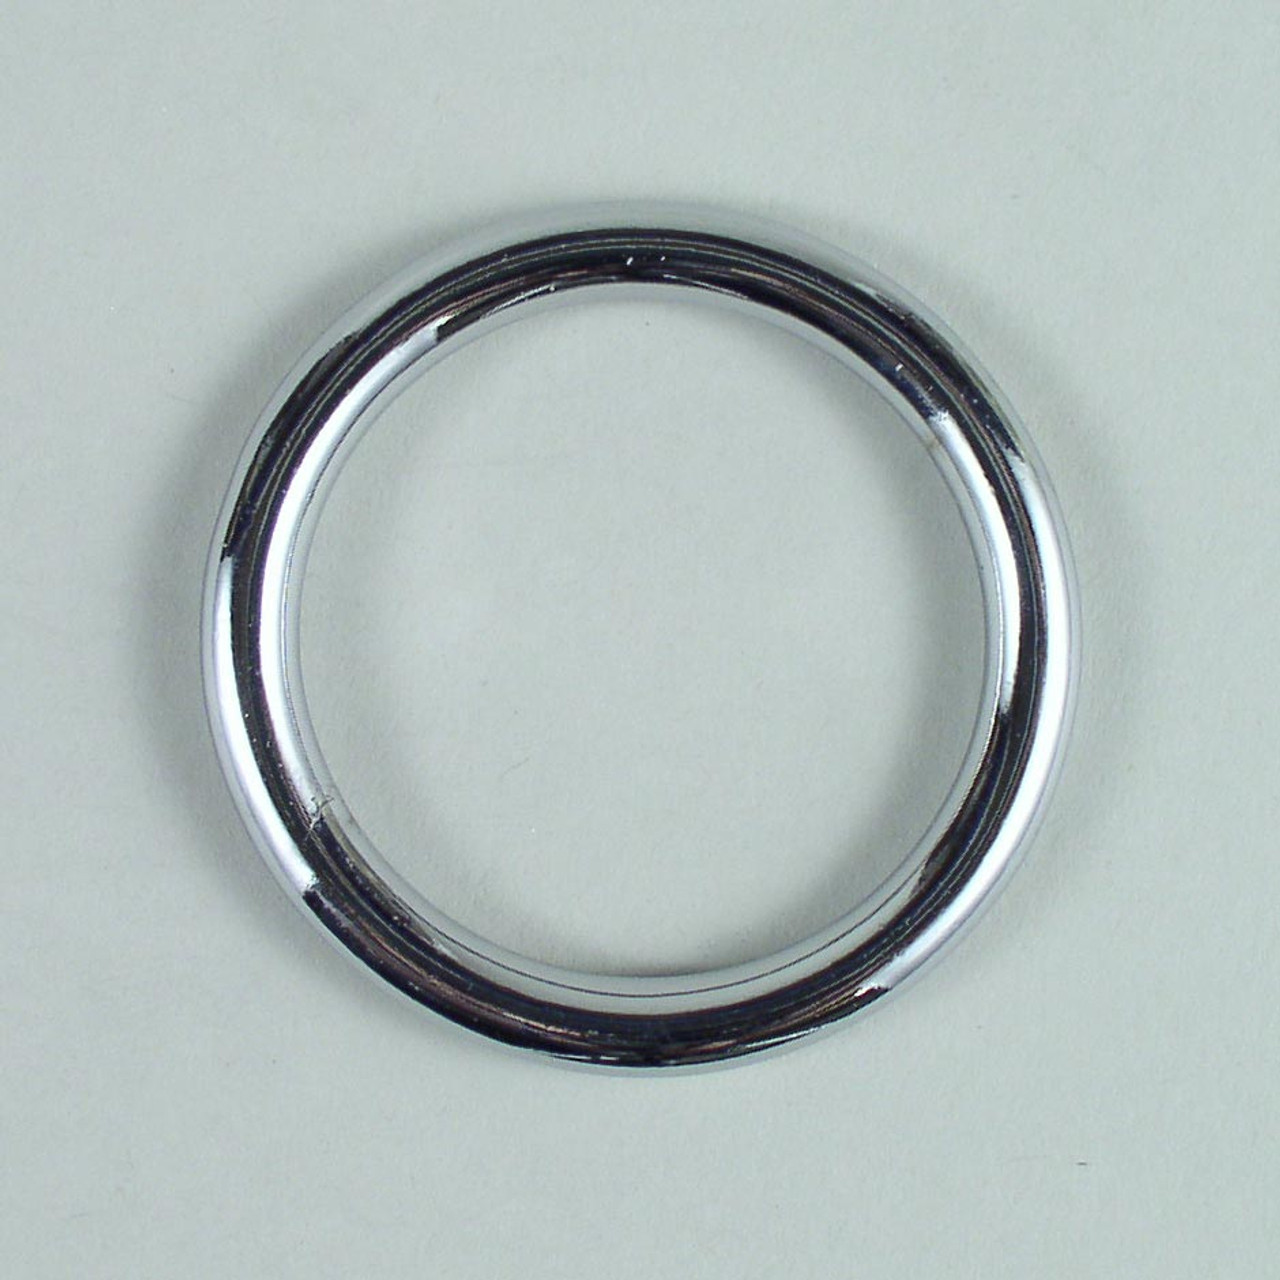 3 Inch, Metal Distribution Ring 50-Pack | Wire & Cable Your Way